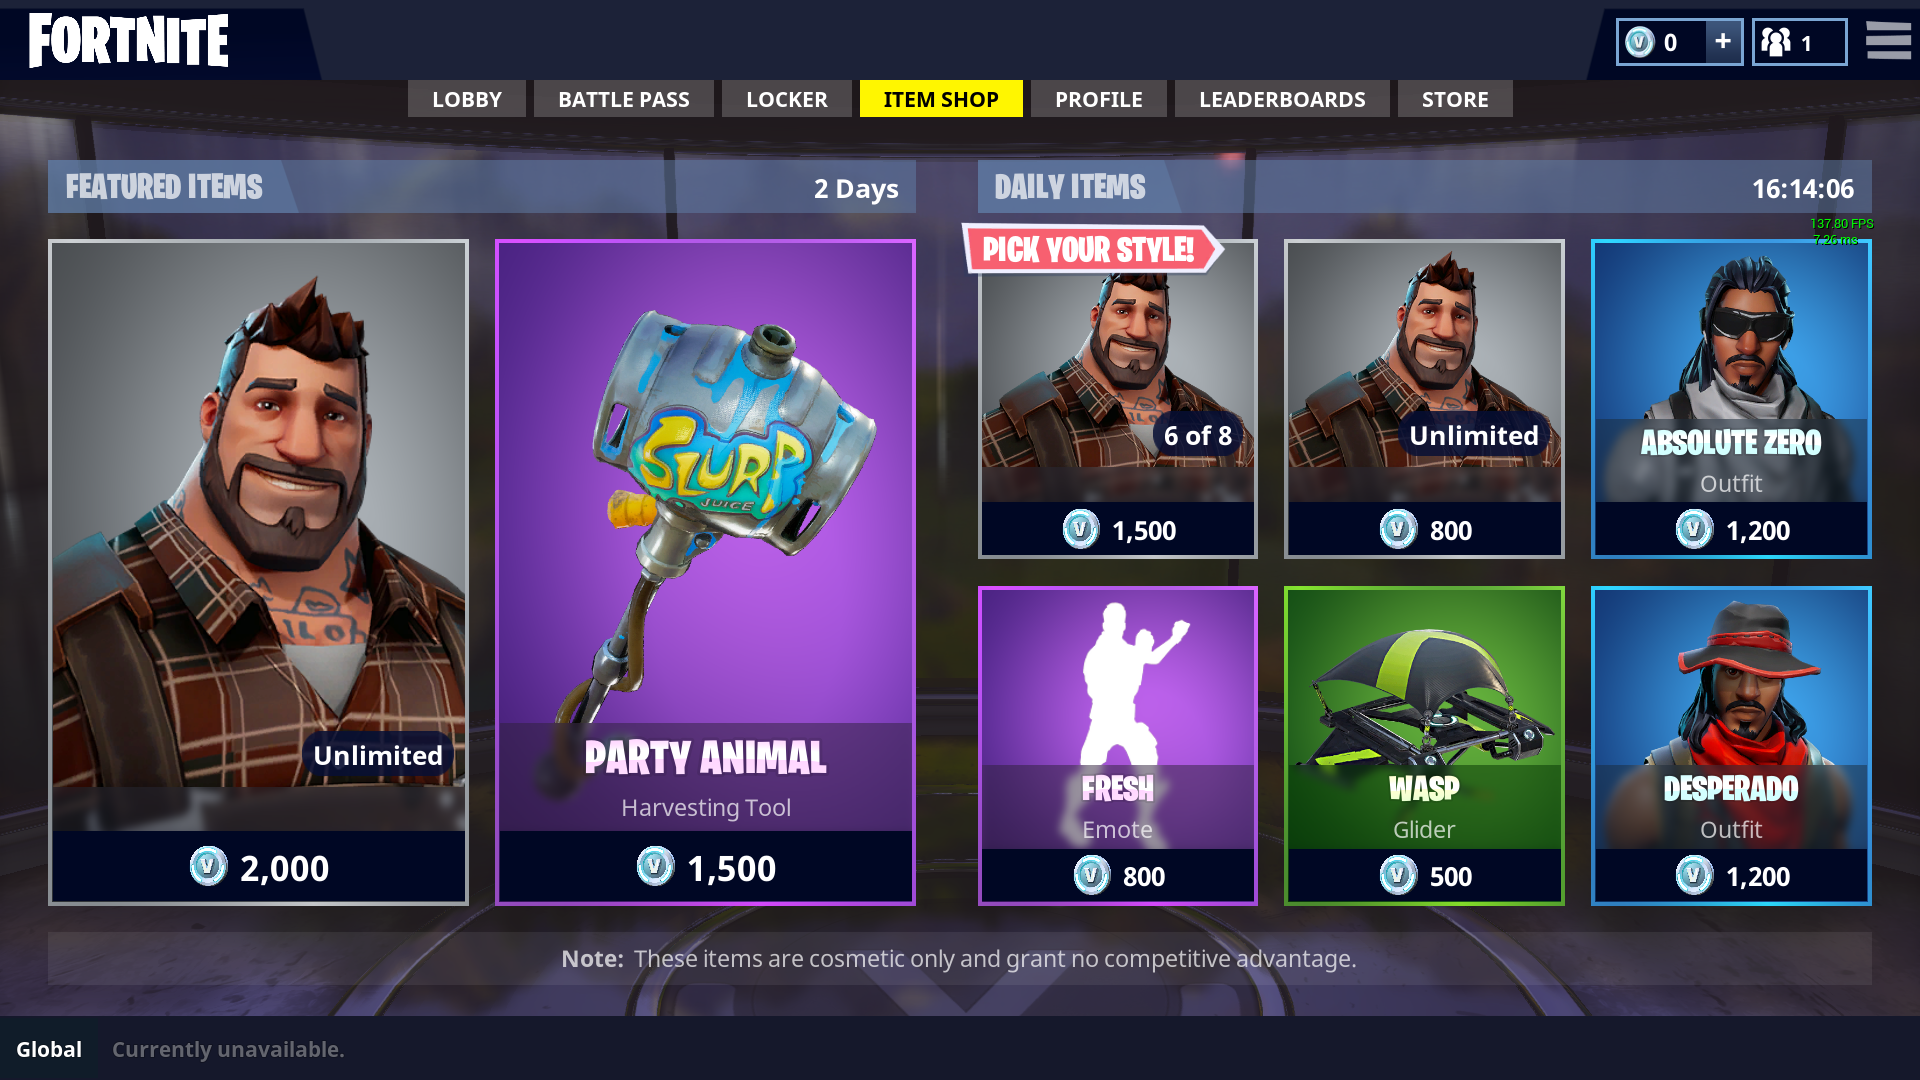 So I Went To Fortnite And Decided Visit The Items Shop What